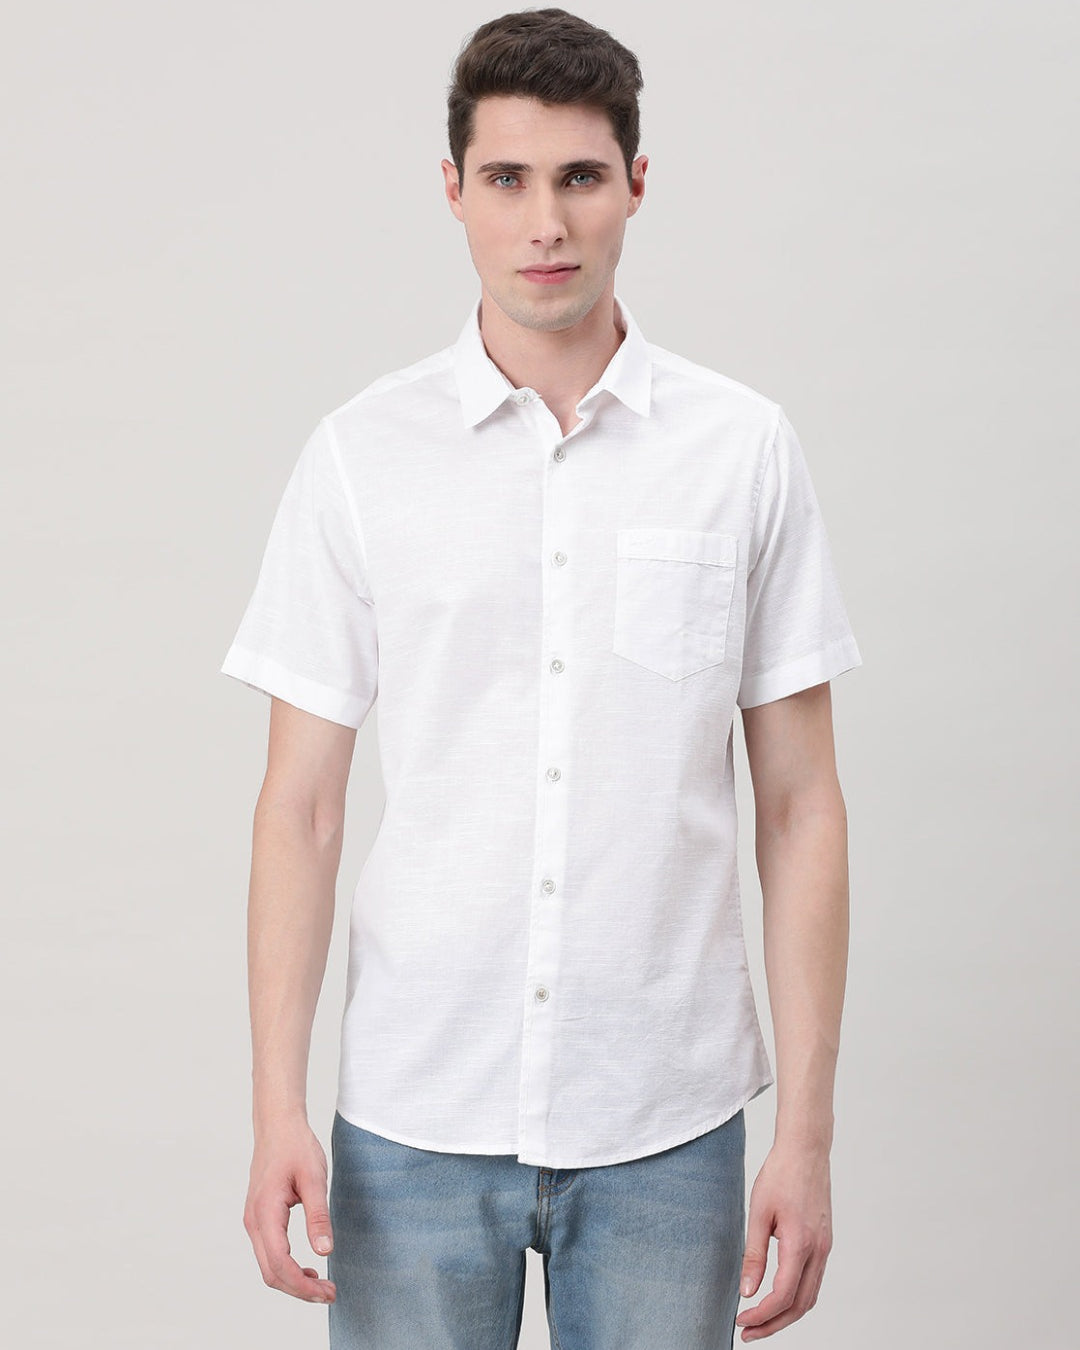 Casual Half Sleeve Comfort Fit Textured plain shirt White with Collar